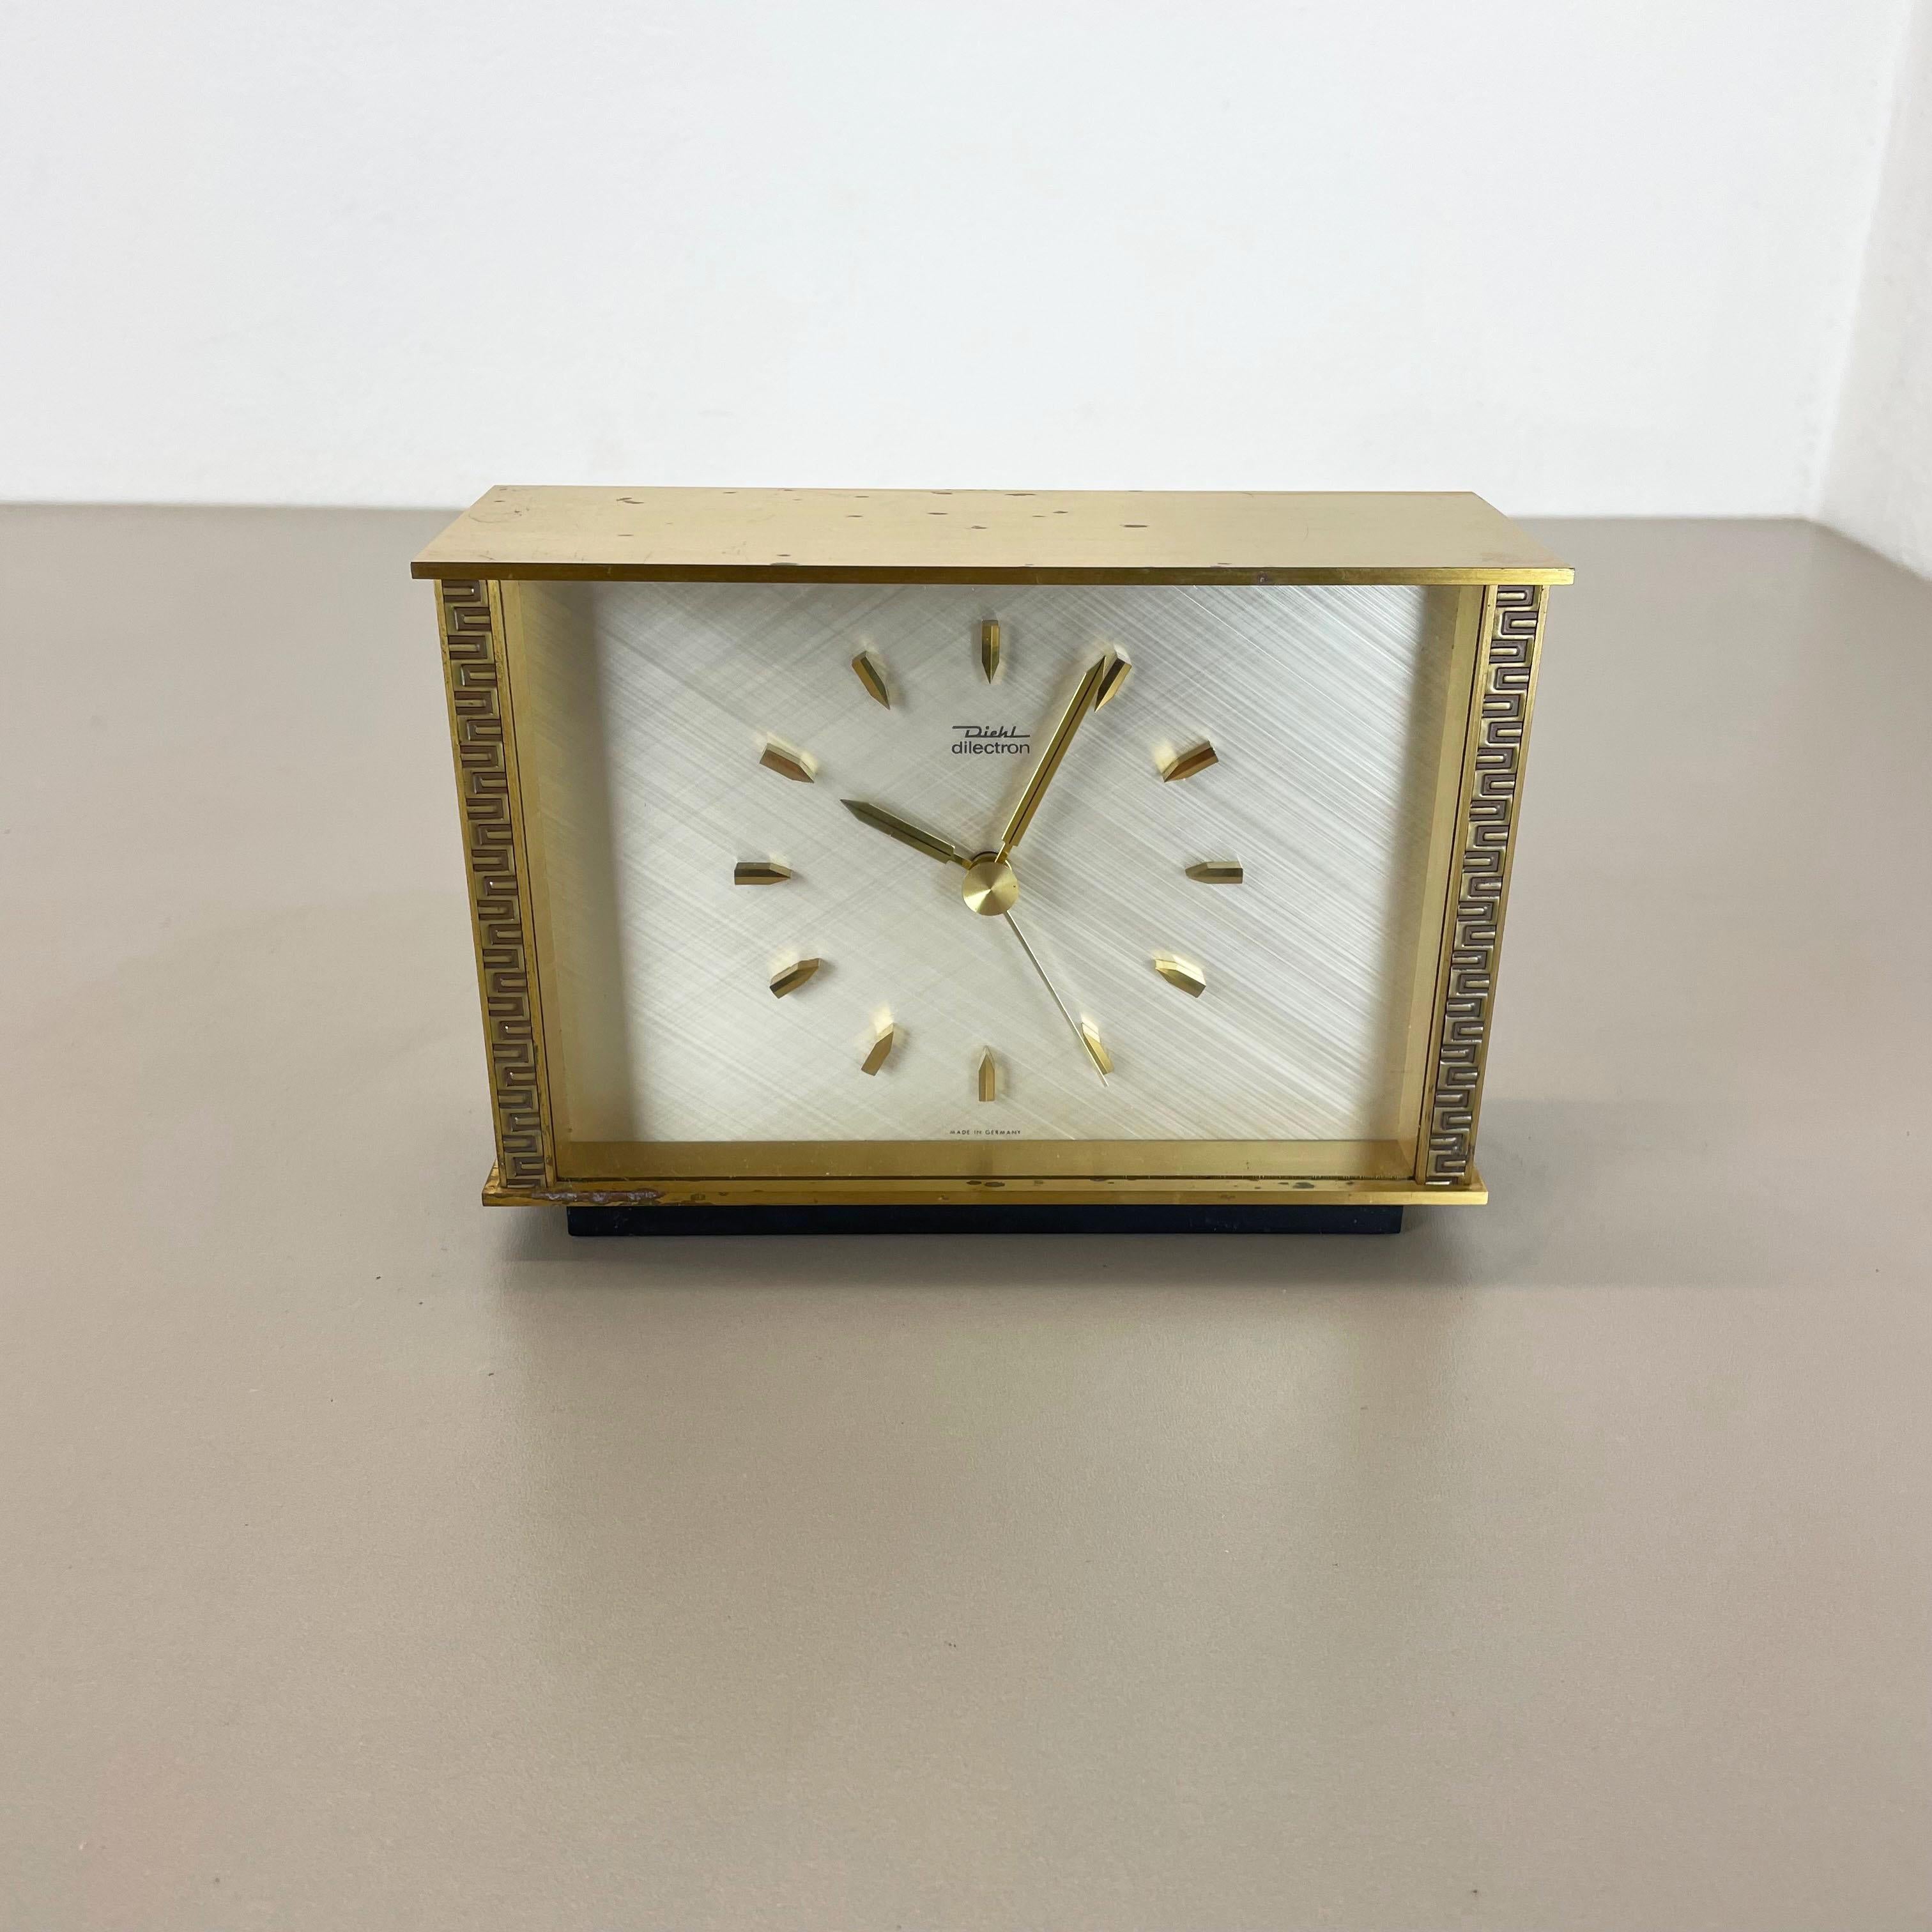 Mid-Century Modern Vintage Modernist Metal Brass Table Clock by Diehl Dilectron, Germany 1960s For Sale